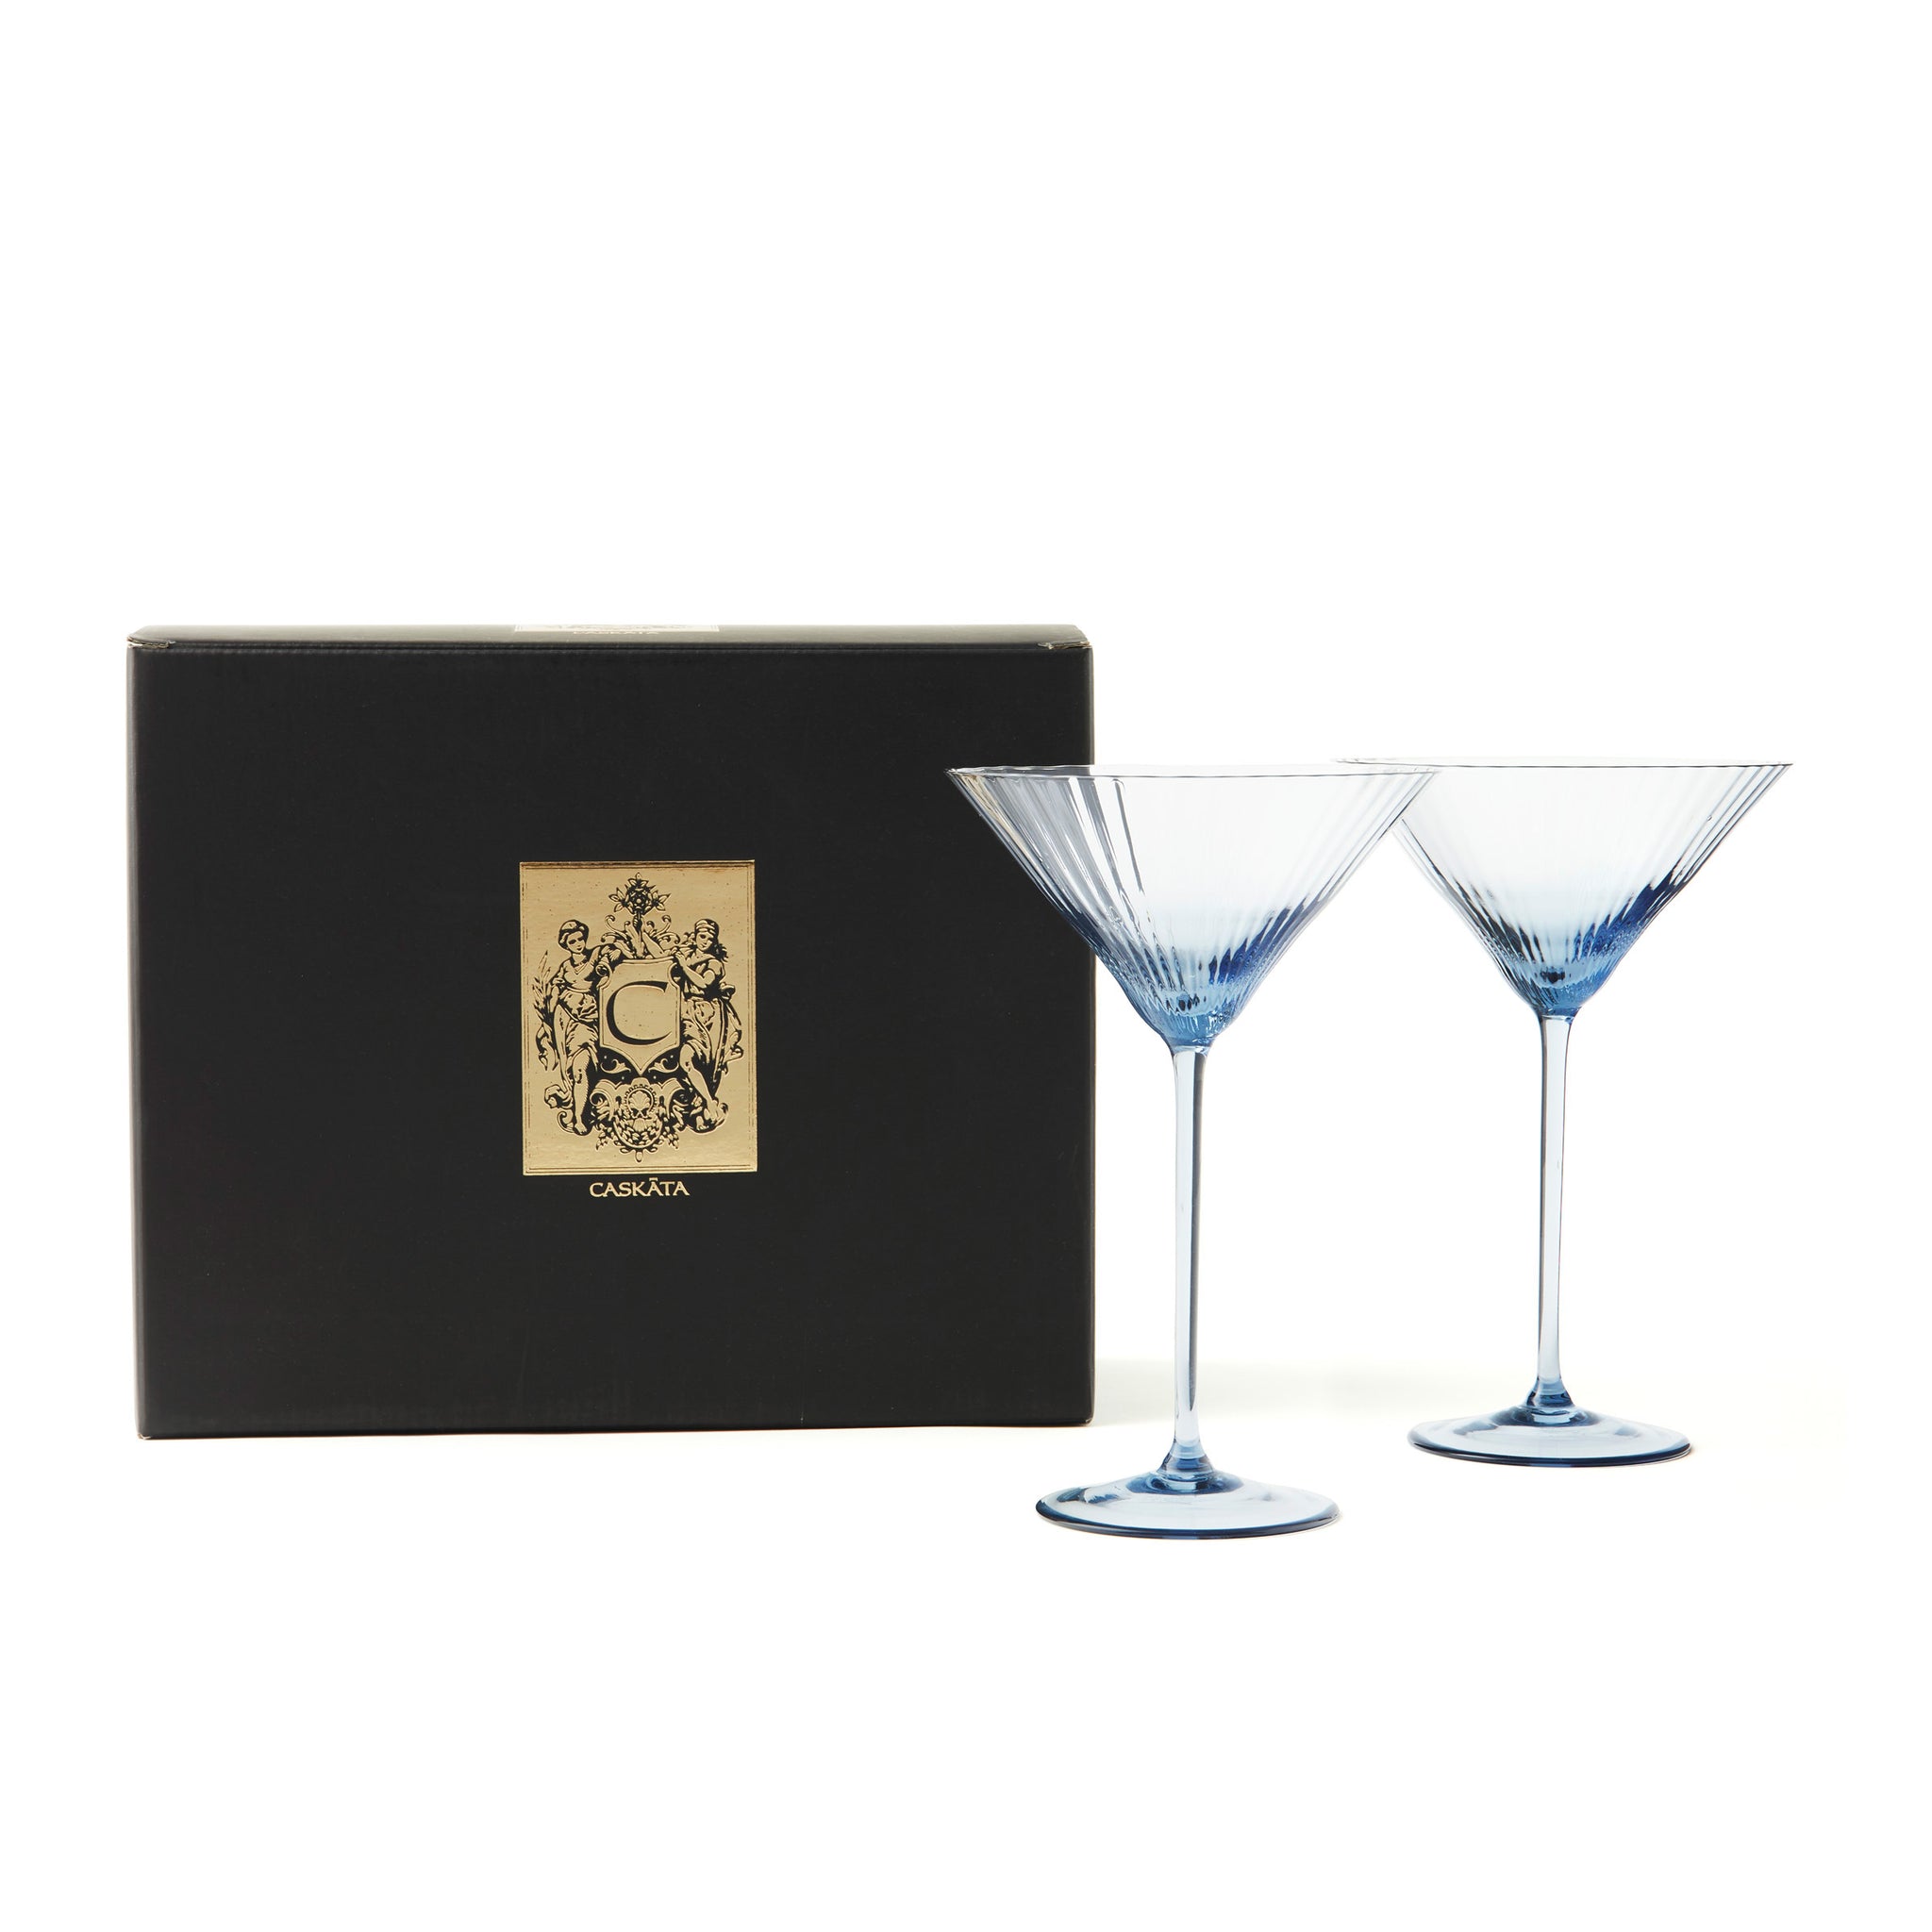 Coupe Cocktail Glass | Set of 2 | 8 oz | Hand-Blown Crystal Martini Glasses